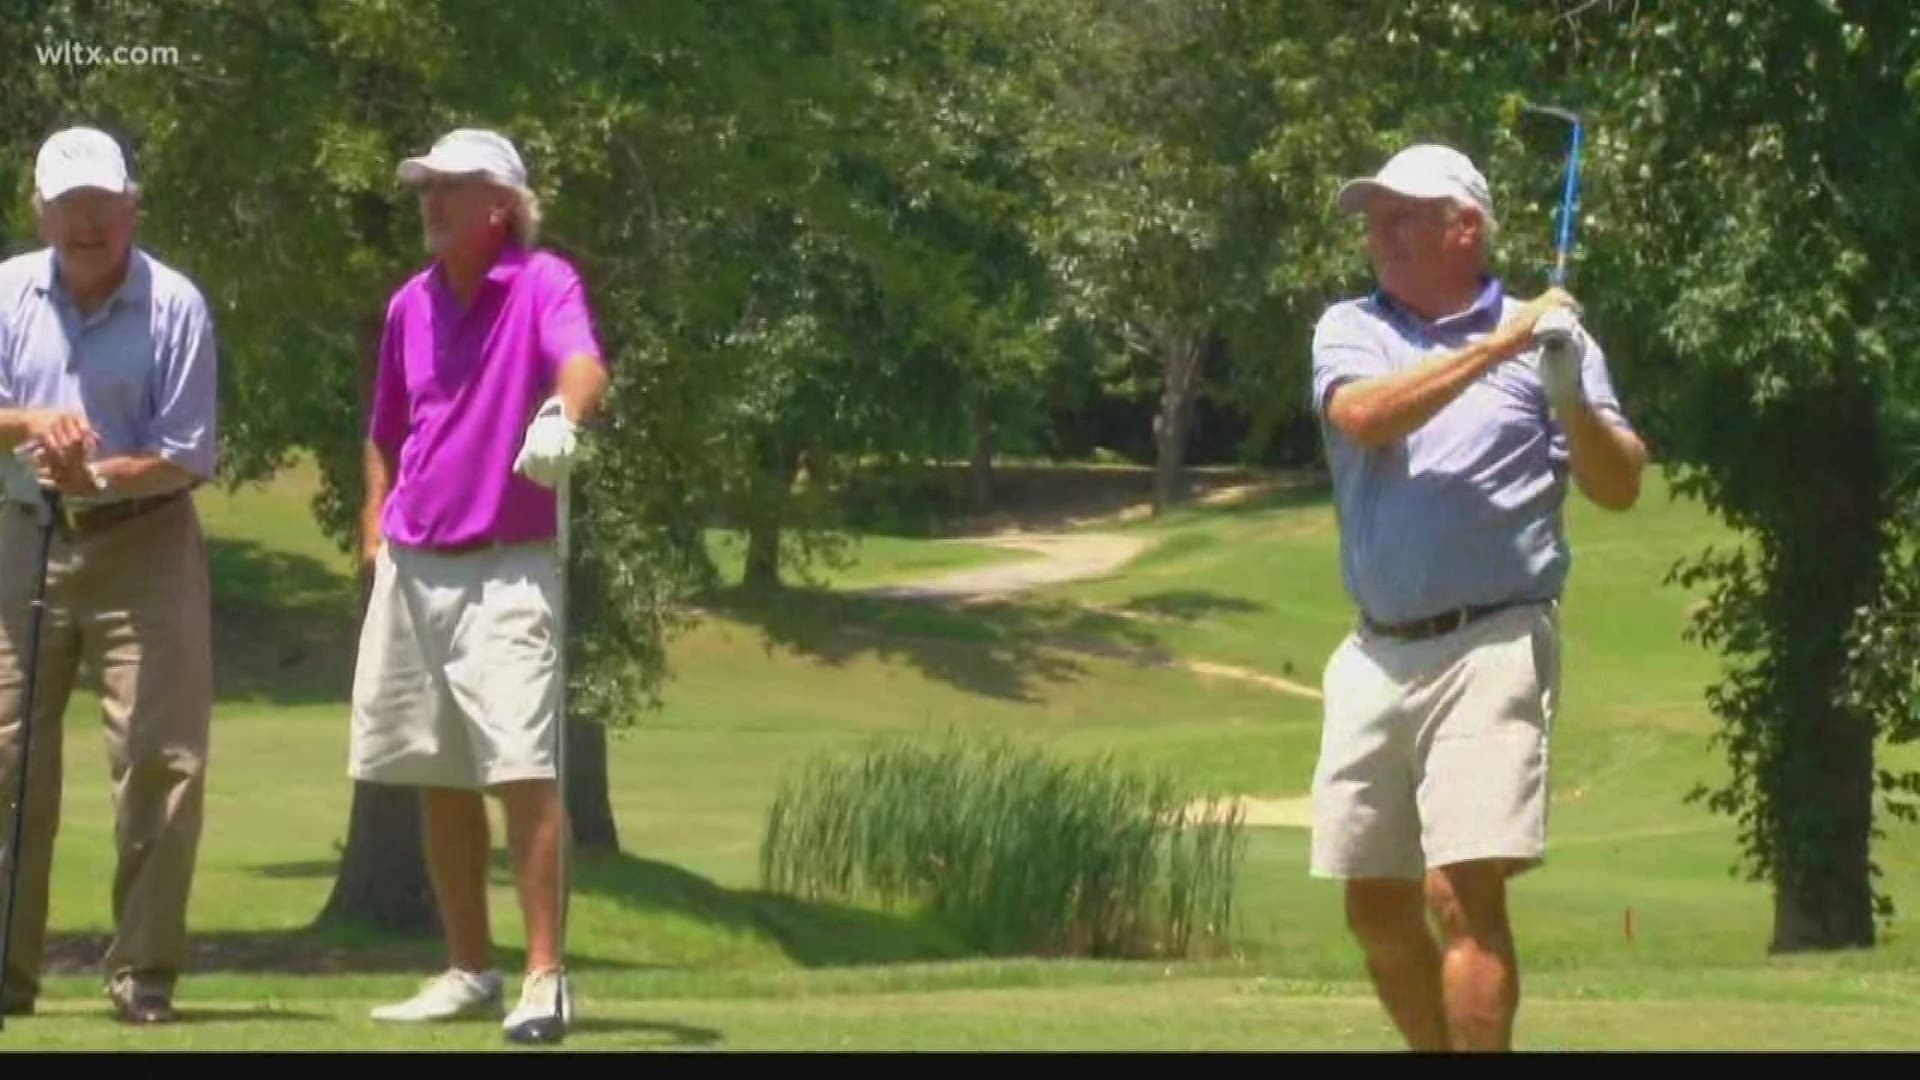 The Midlands Chevy City Golf tournament had an eventful final day of action. The senior division was decided on a multi-hole playoff and a Spring Valley grad captures the amateur title by one stroke.